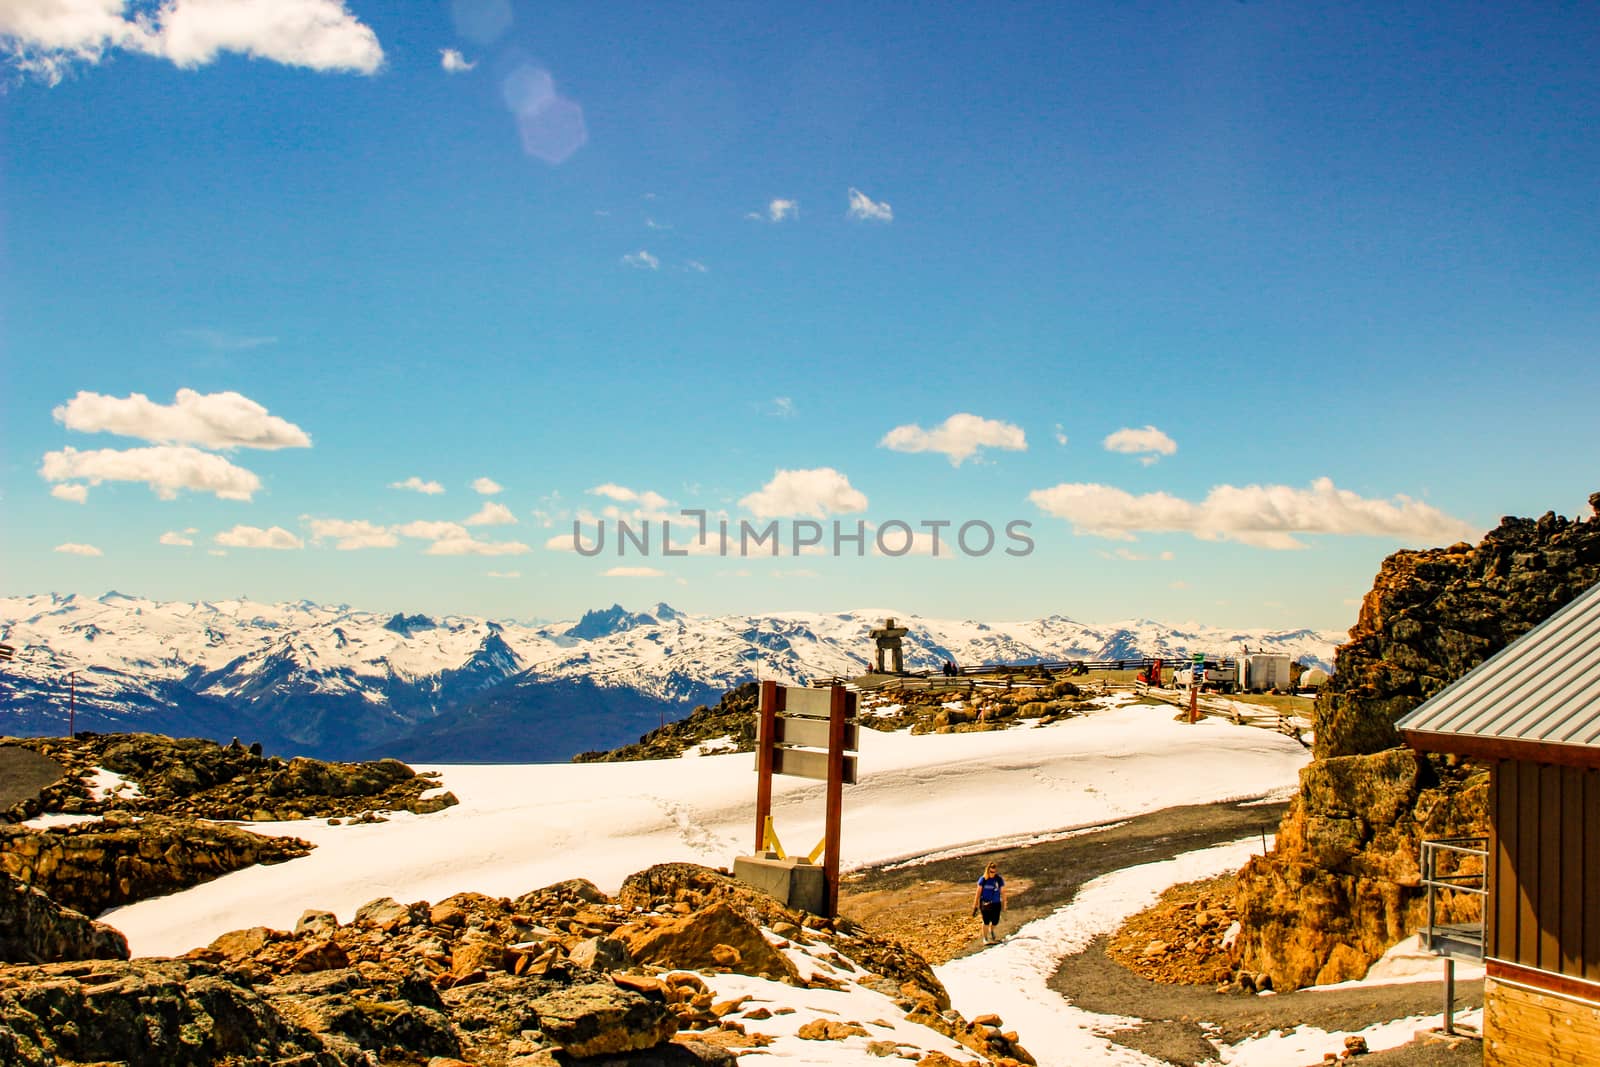 Whistler Peak. People looking at the views from the Peak of Whistler Mountain by mynewturtle1